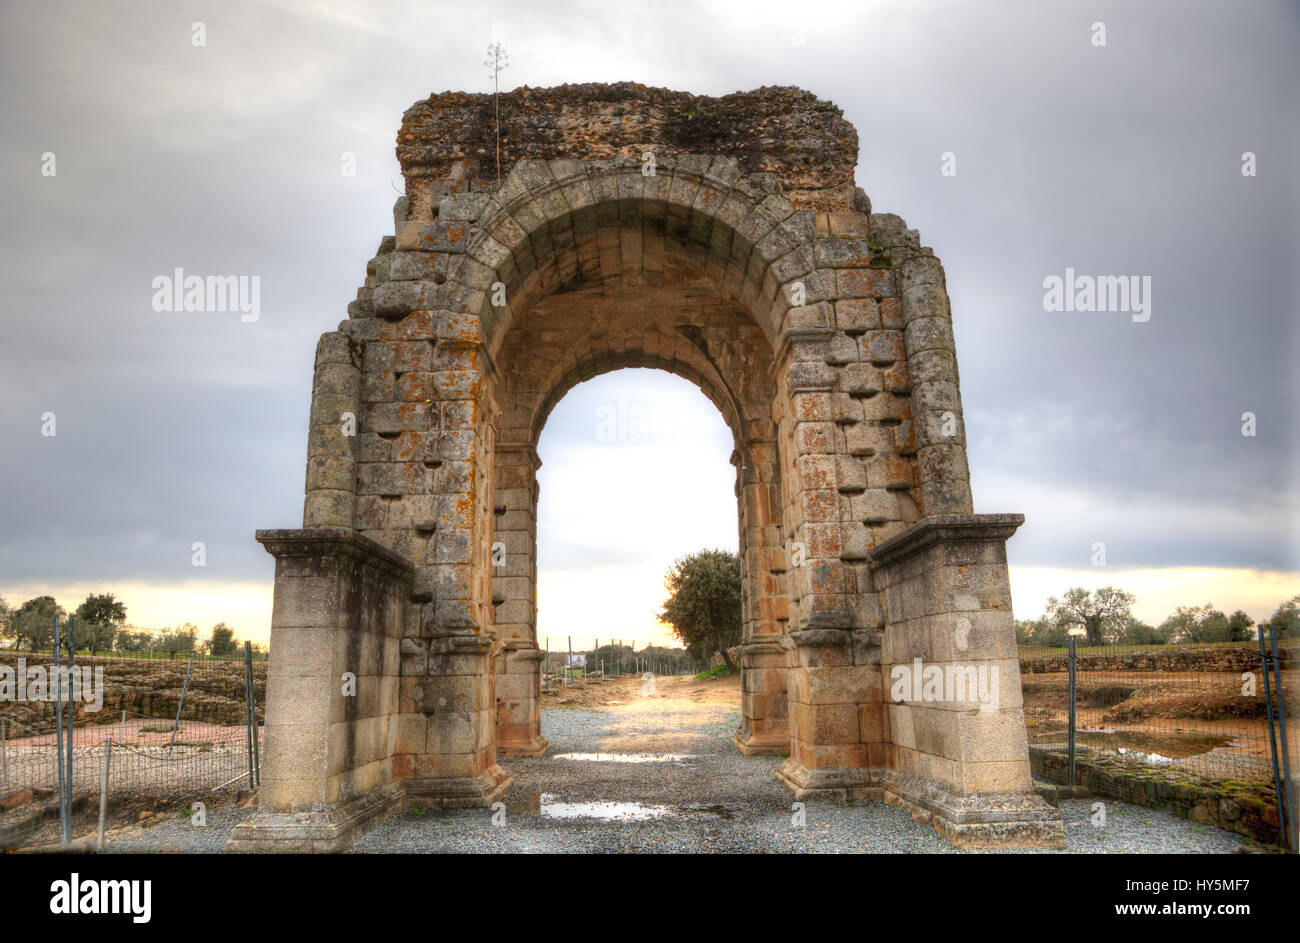 Roman Arch of Caparra, (1st-2nd century AD). Crossroad ancient city ruins at Silver Route Stock Photo